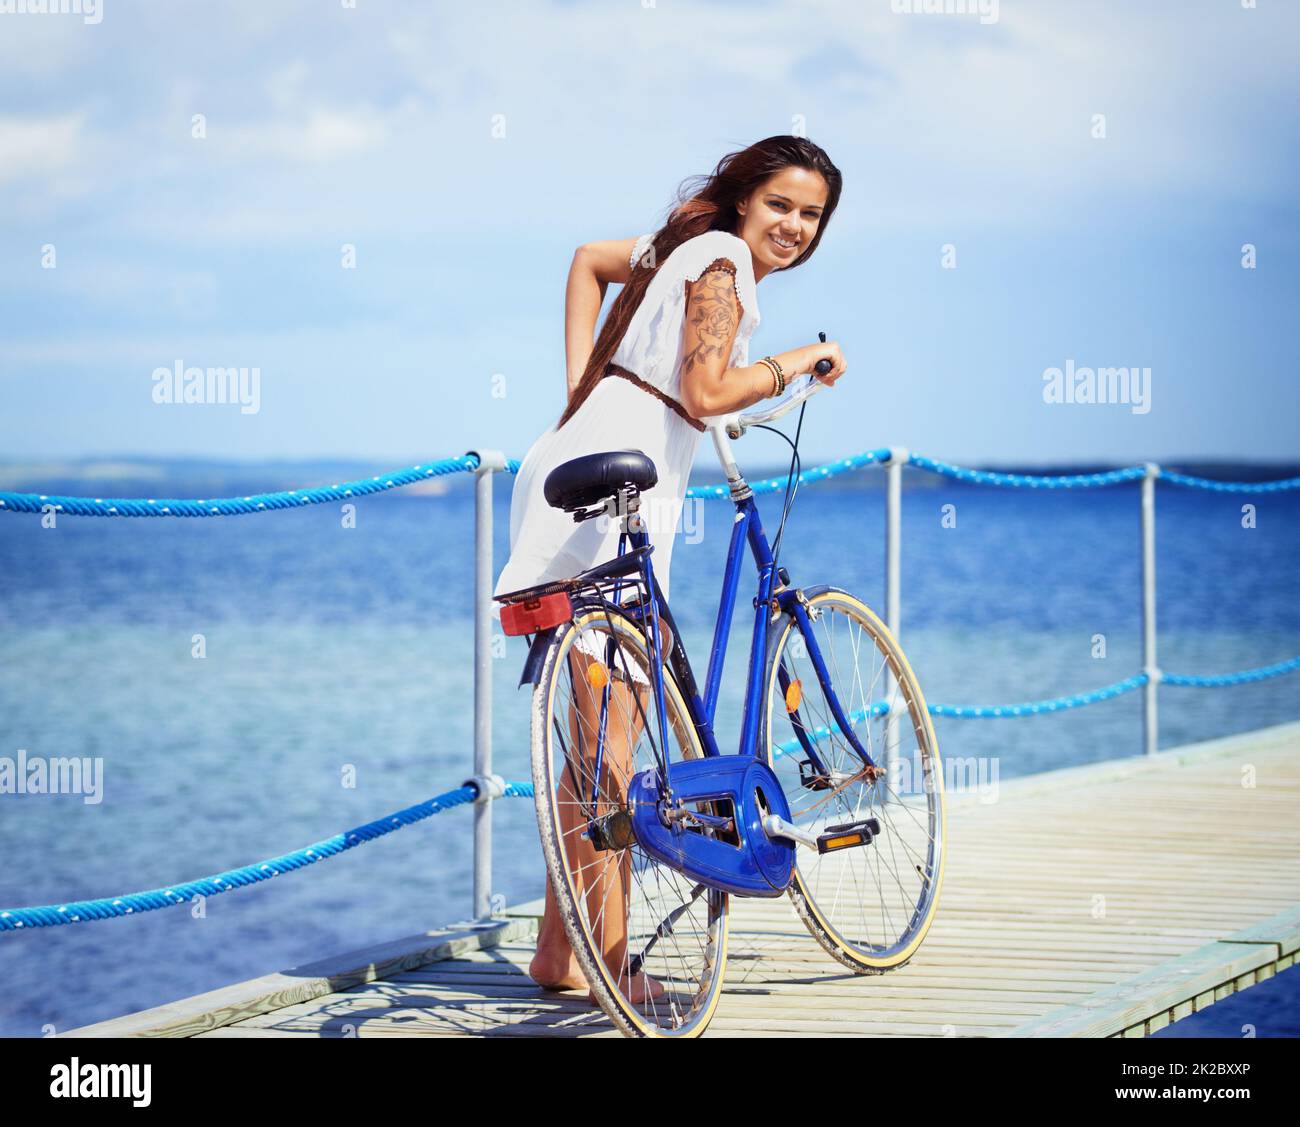 Bicycle fun beside the sea. Full length shot of a gorgeous tattooed young woman pushing her bicycle along a pier. Stock Photo